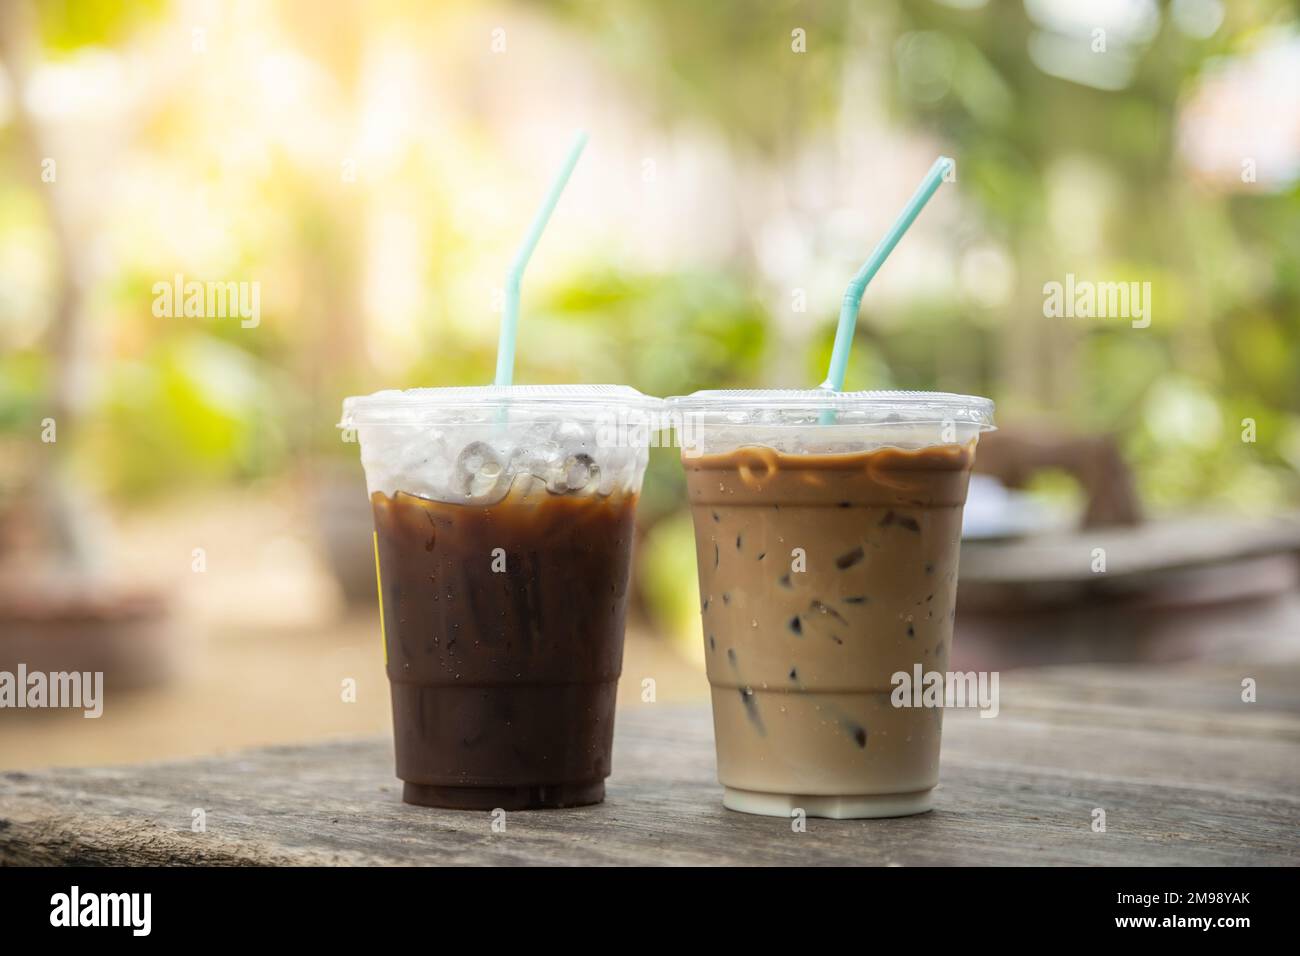 https://c8.alamy.com/comp/2M98YAK/closeup-of-takeaway-plastic-cup-of-iced-black-coffee-americano-and-coffee-latte-on-wooden-table-with-green-nature-background-2M98YAK.jpg